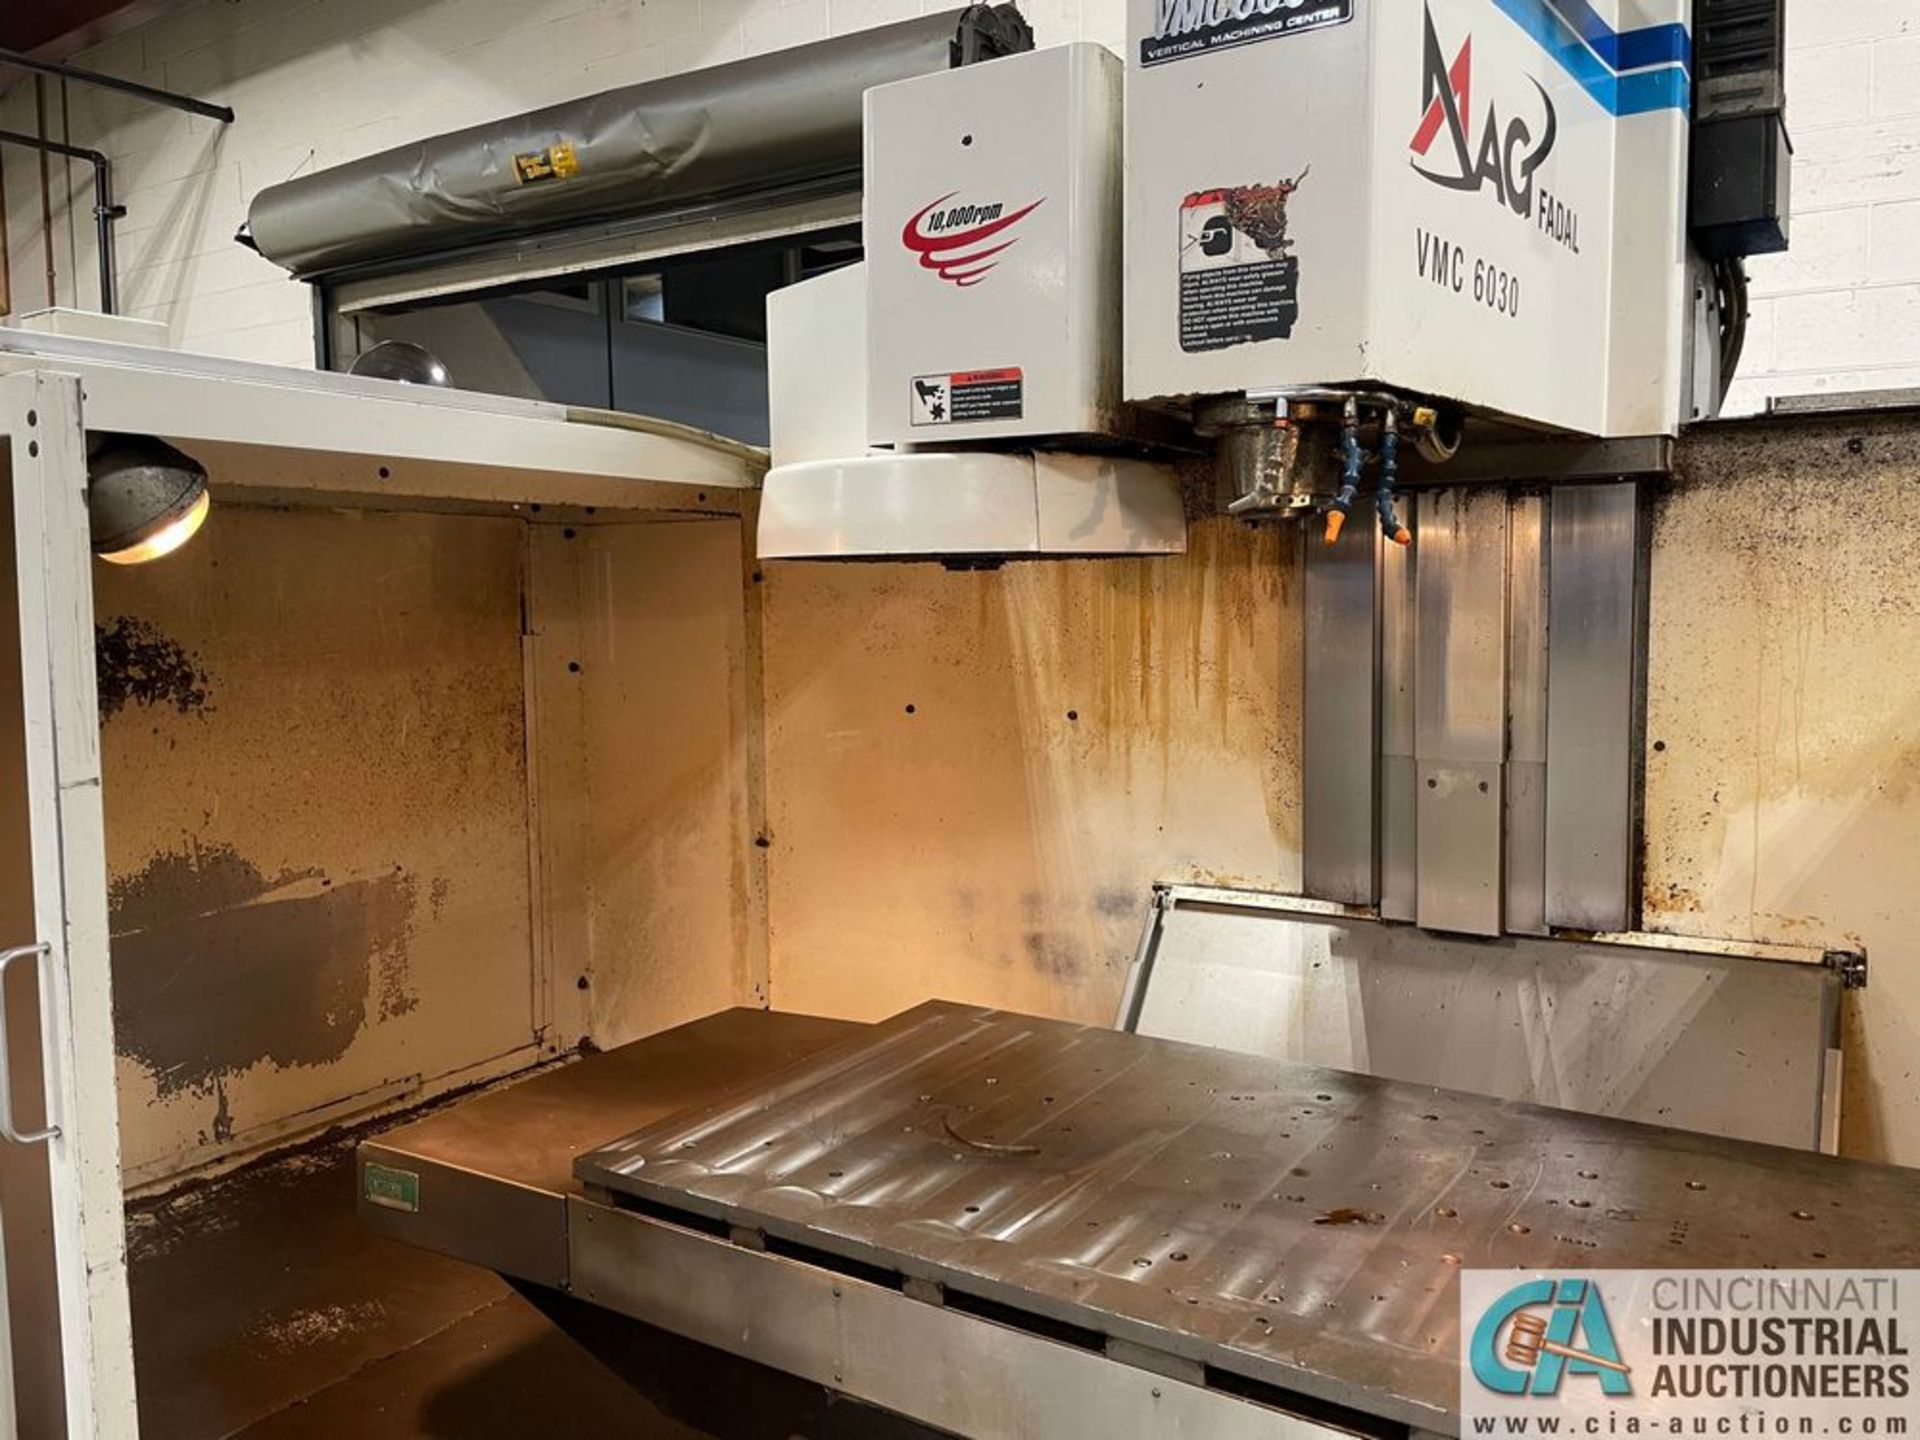 MAG FADAL VMC6030 CNC VERTICAL MACHINING CENTER; **Loading Fee Due the "ERRA" $750.00** - Image 3 of 11